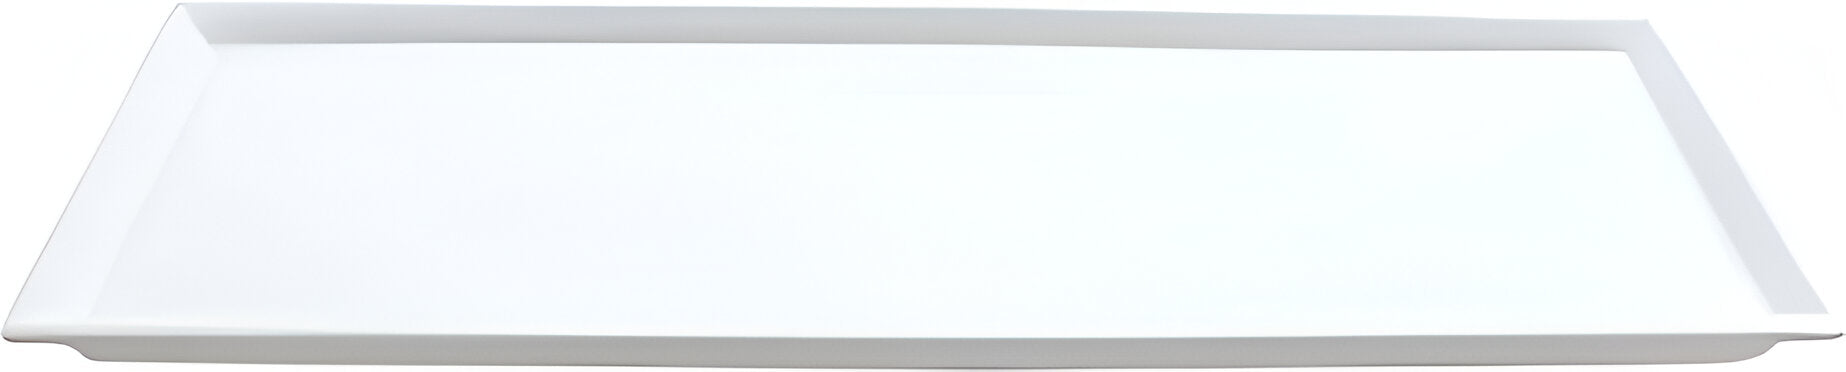 Bugambilia - 12.31" White Rectangular Serving Plate With Lid Cover - LCIH1/2-MOD-WW